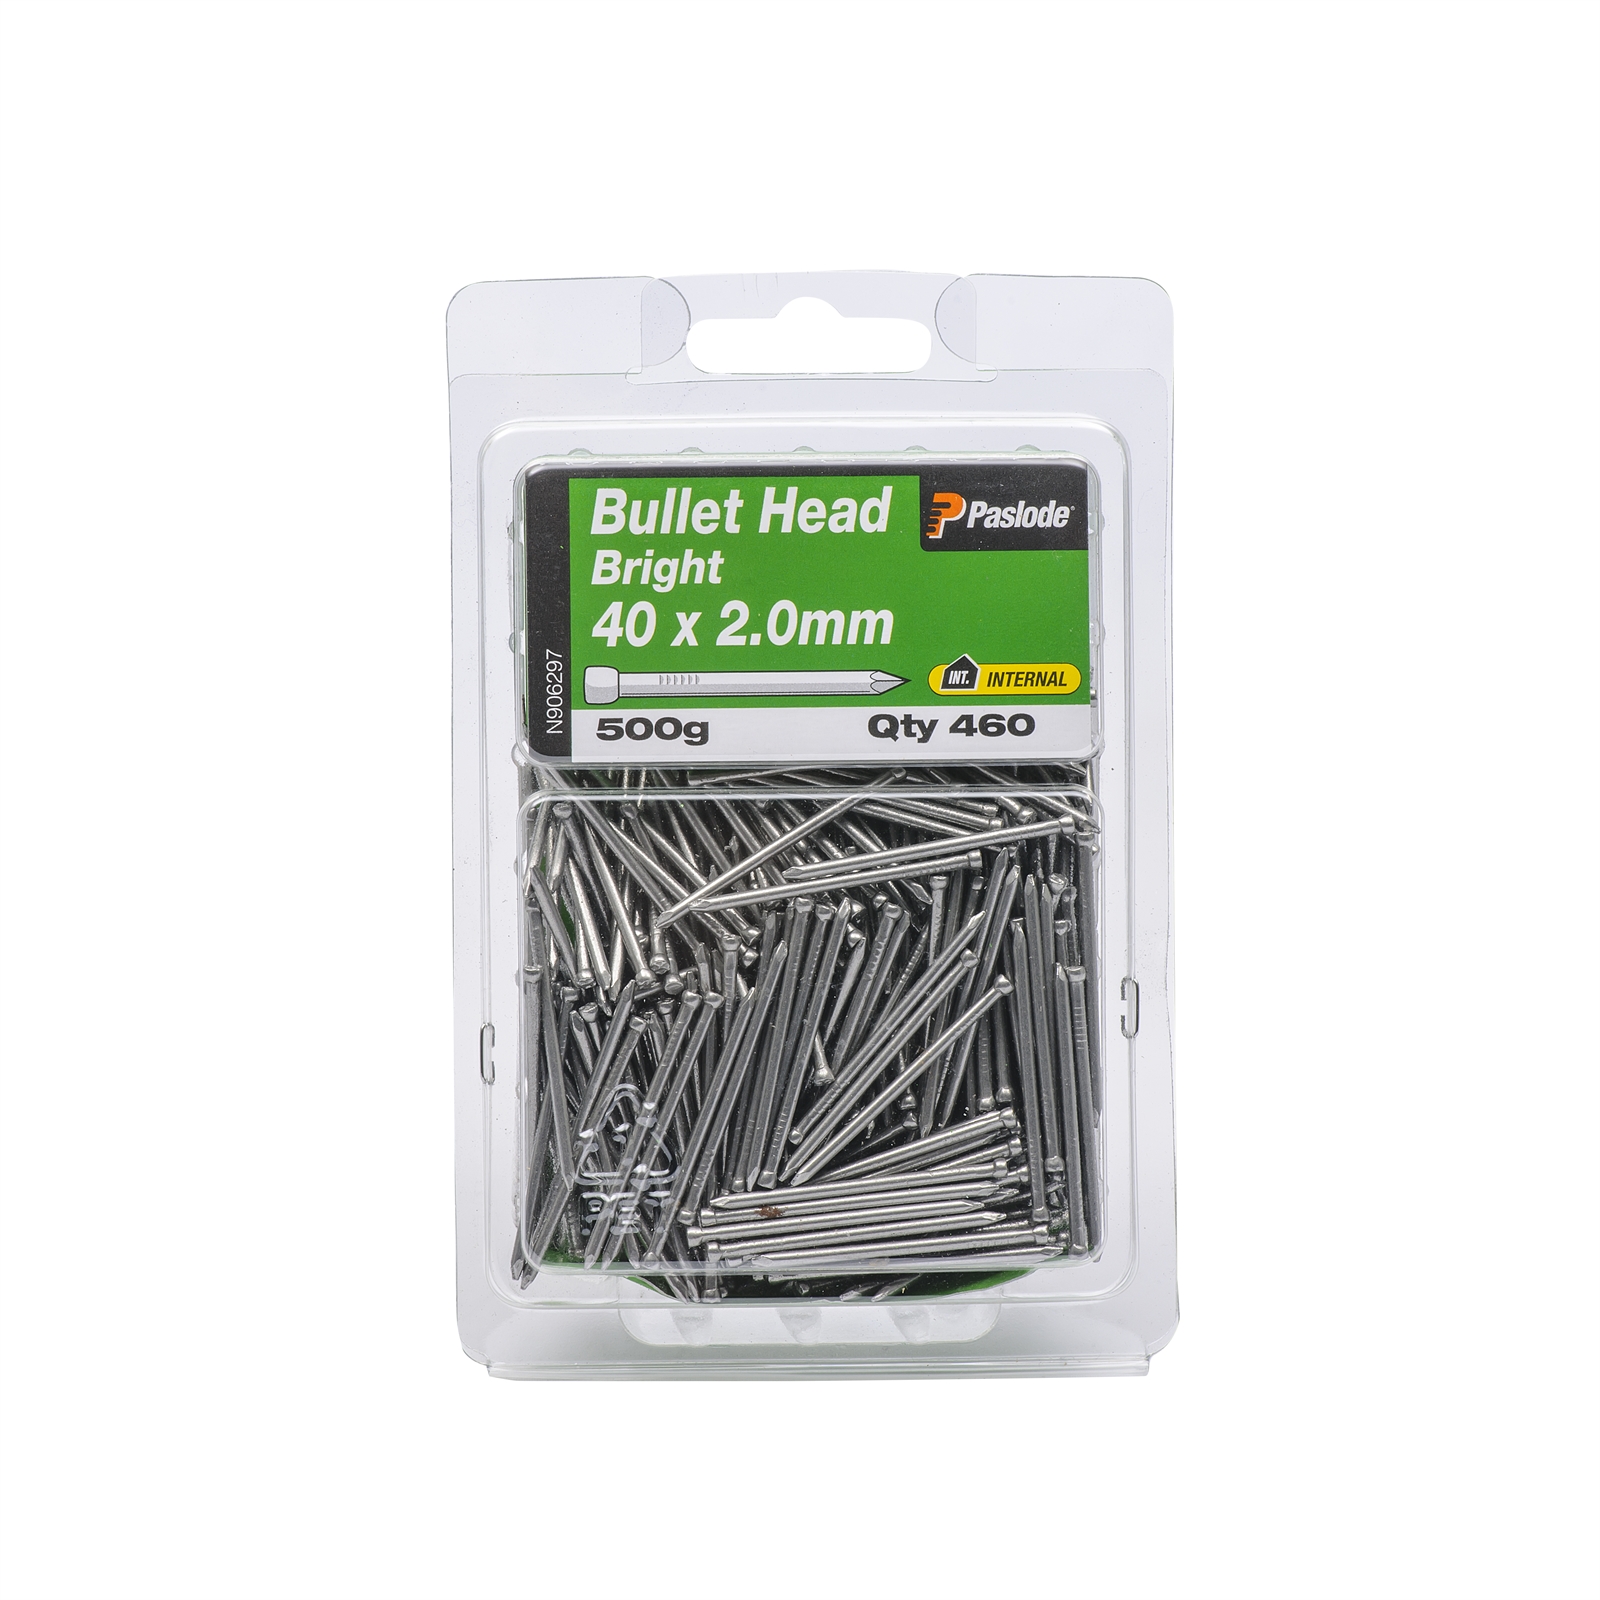 Paslode 40 x 2.0mm 500g Bright Steel Bullet Head Nails - 460 Pack